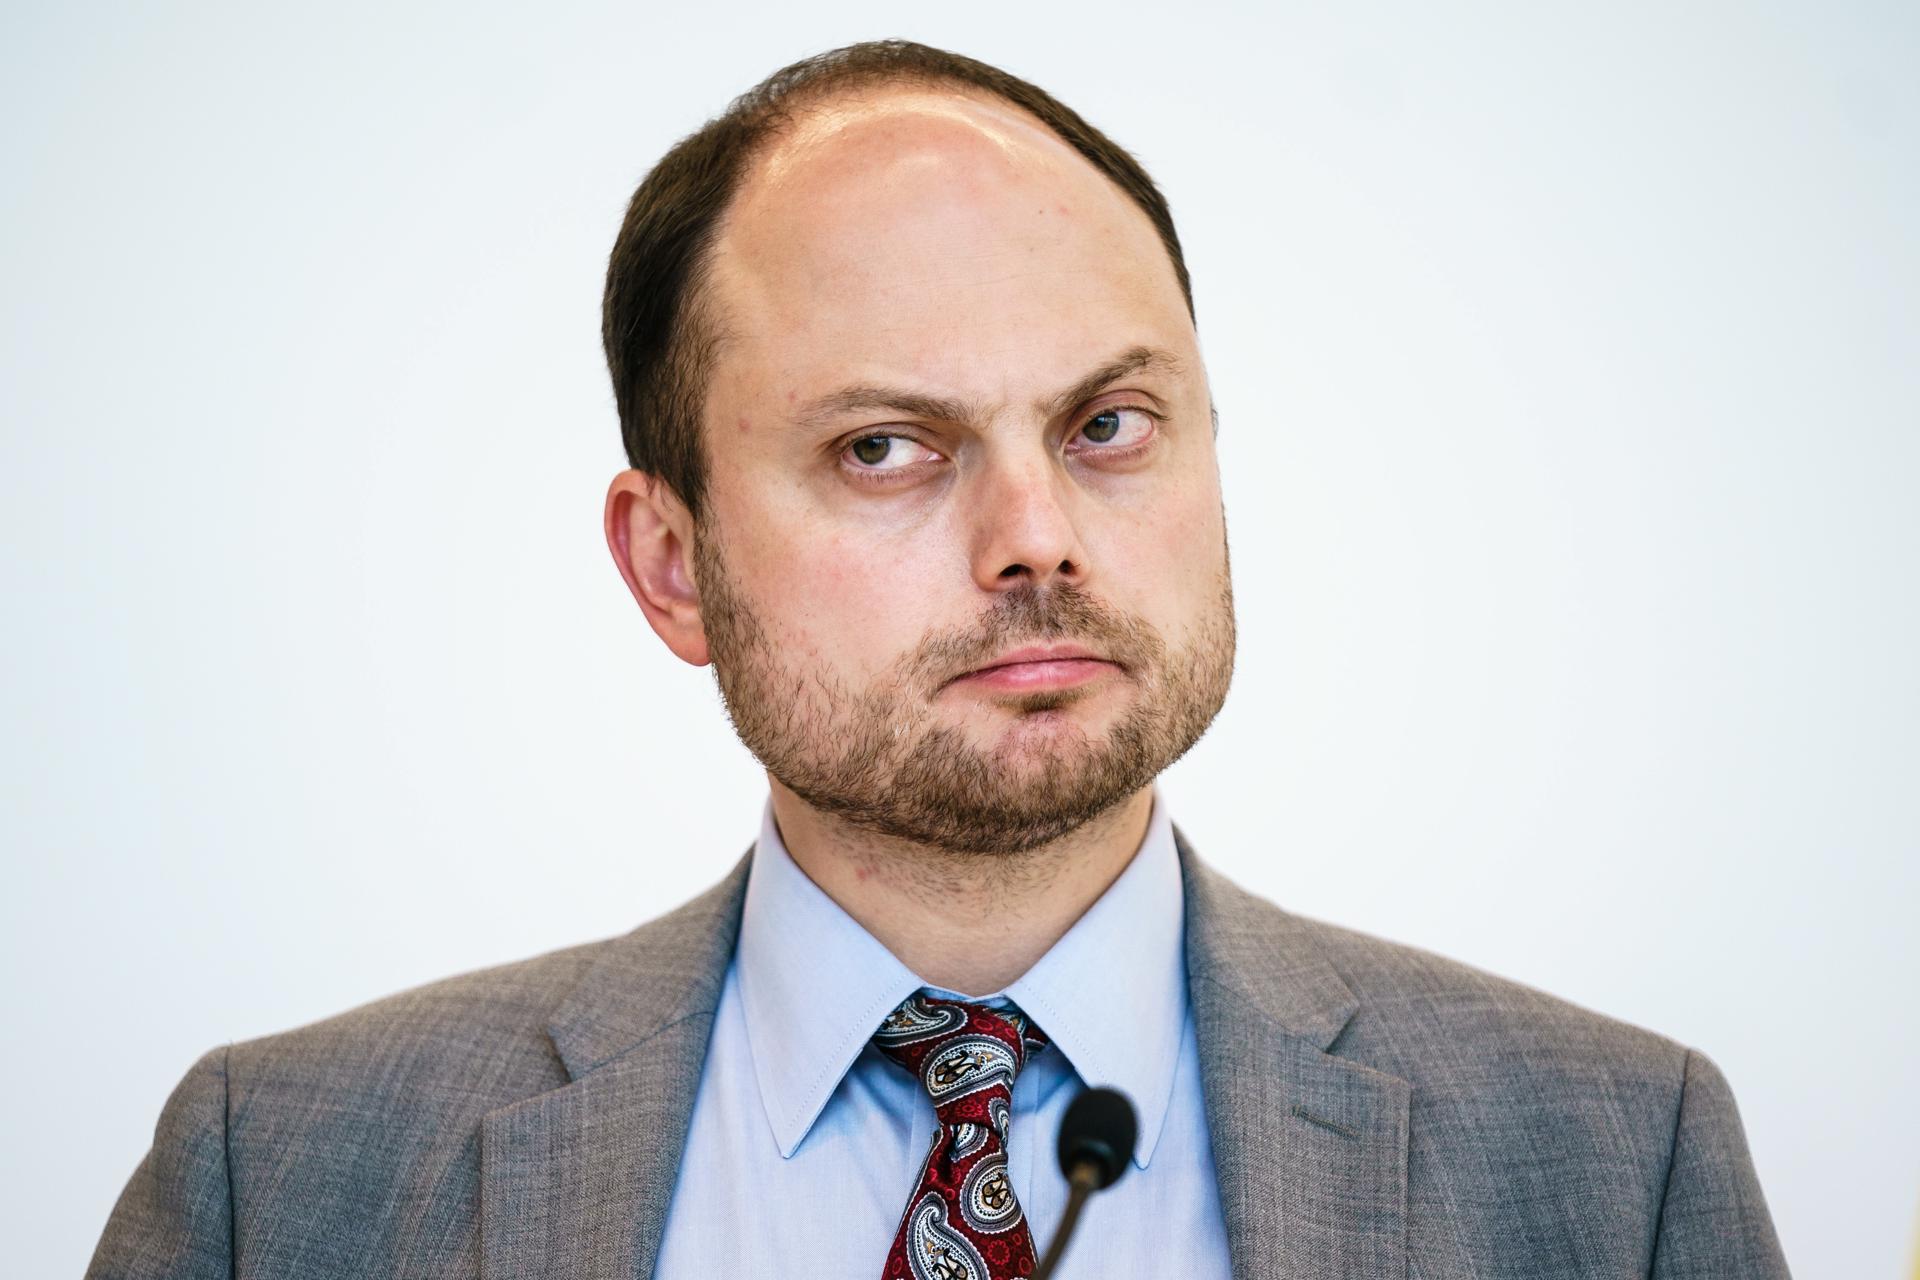 (FILE) Russian dissident Vladimir Kara-Murza attends a press statement prior to a faction meeting of the German Free Democratic Party (FDP) at the German parliament Bundestag in Berlin, Germany, 08 September 2020.  EFE/EPA/CLEMENS BILAN